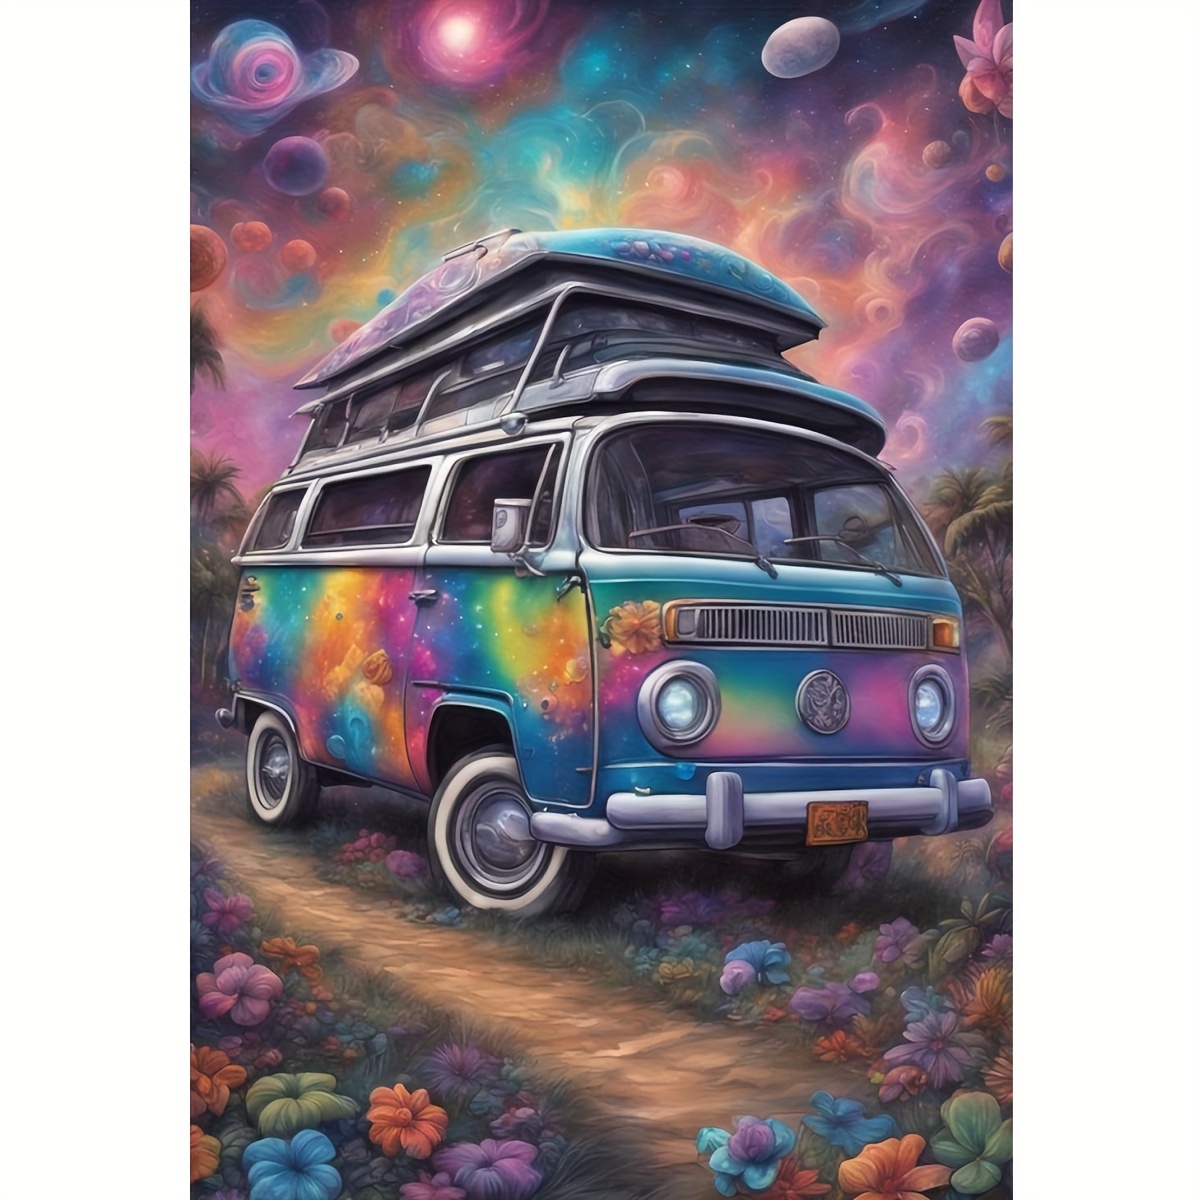 

1pc Vintage Bus Car Pattern Rhinestone Painting Set, Holiday Gifts, Perfect For Wall Decor Art In Home And Office Area, Suitable For Gifts For Relatives And Friends. No Frame (20x30cm/7.87x11.8inch)